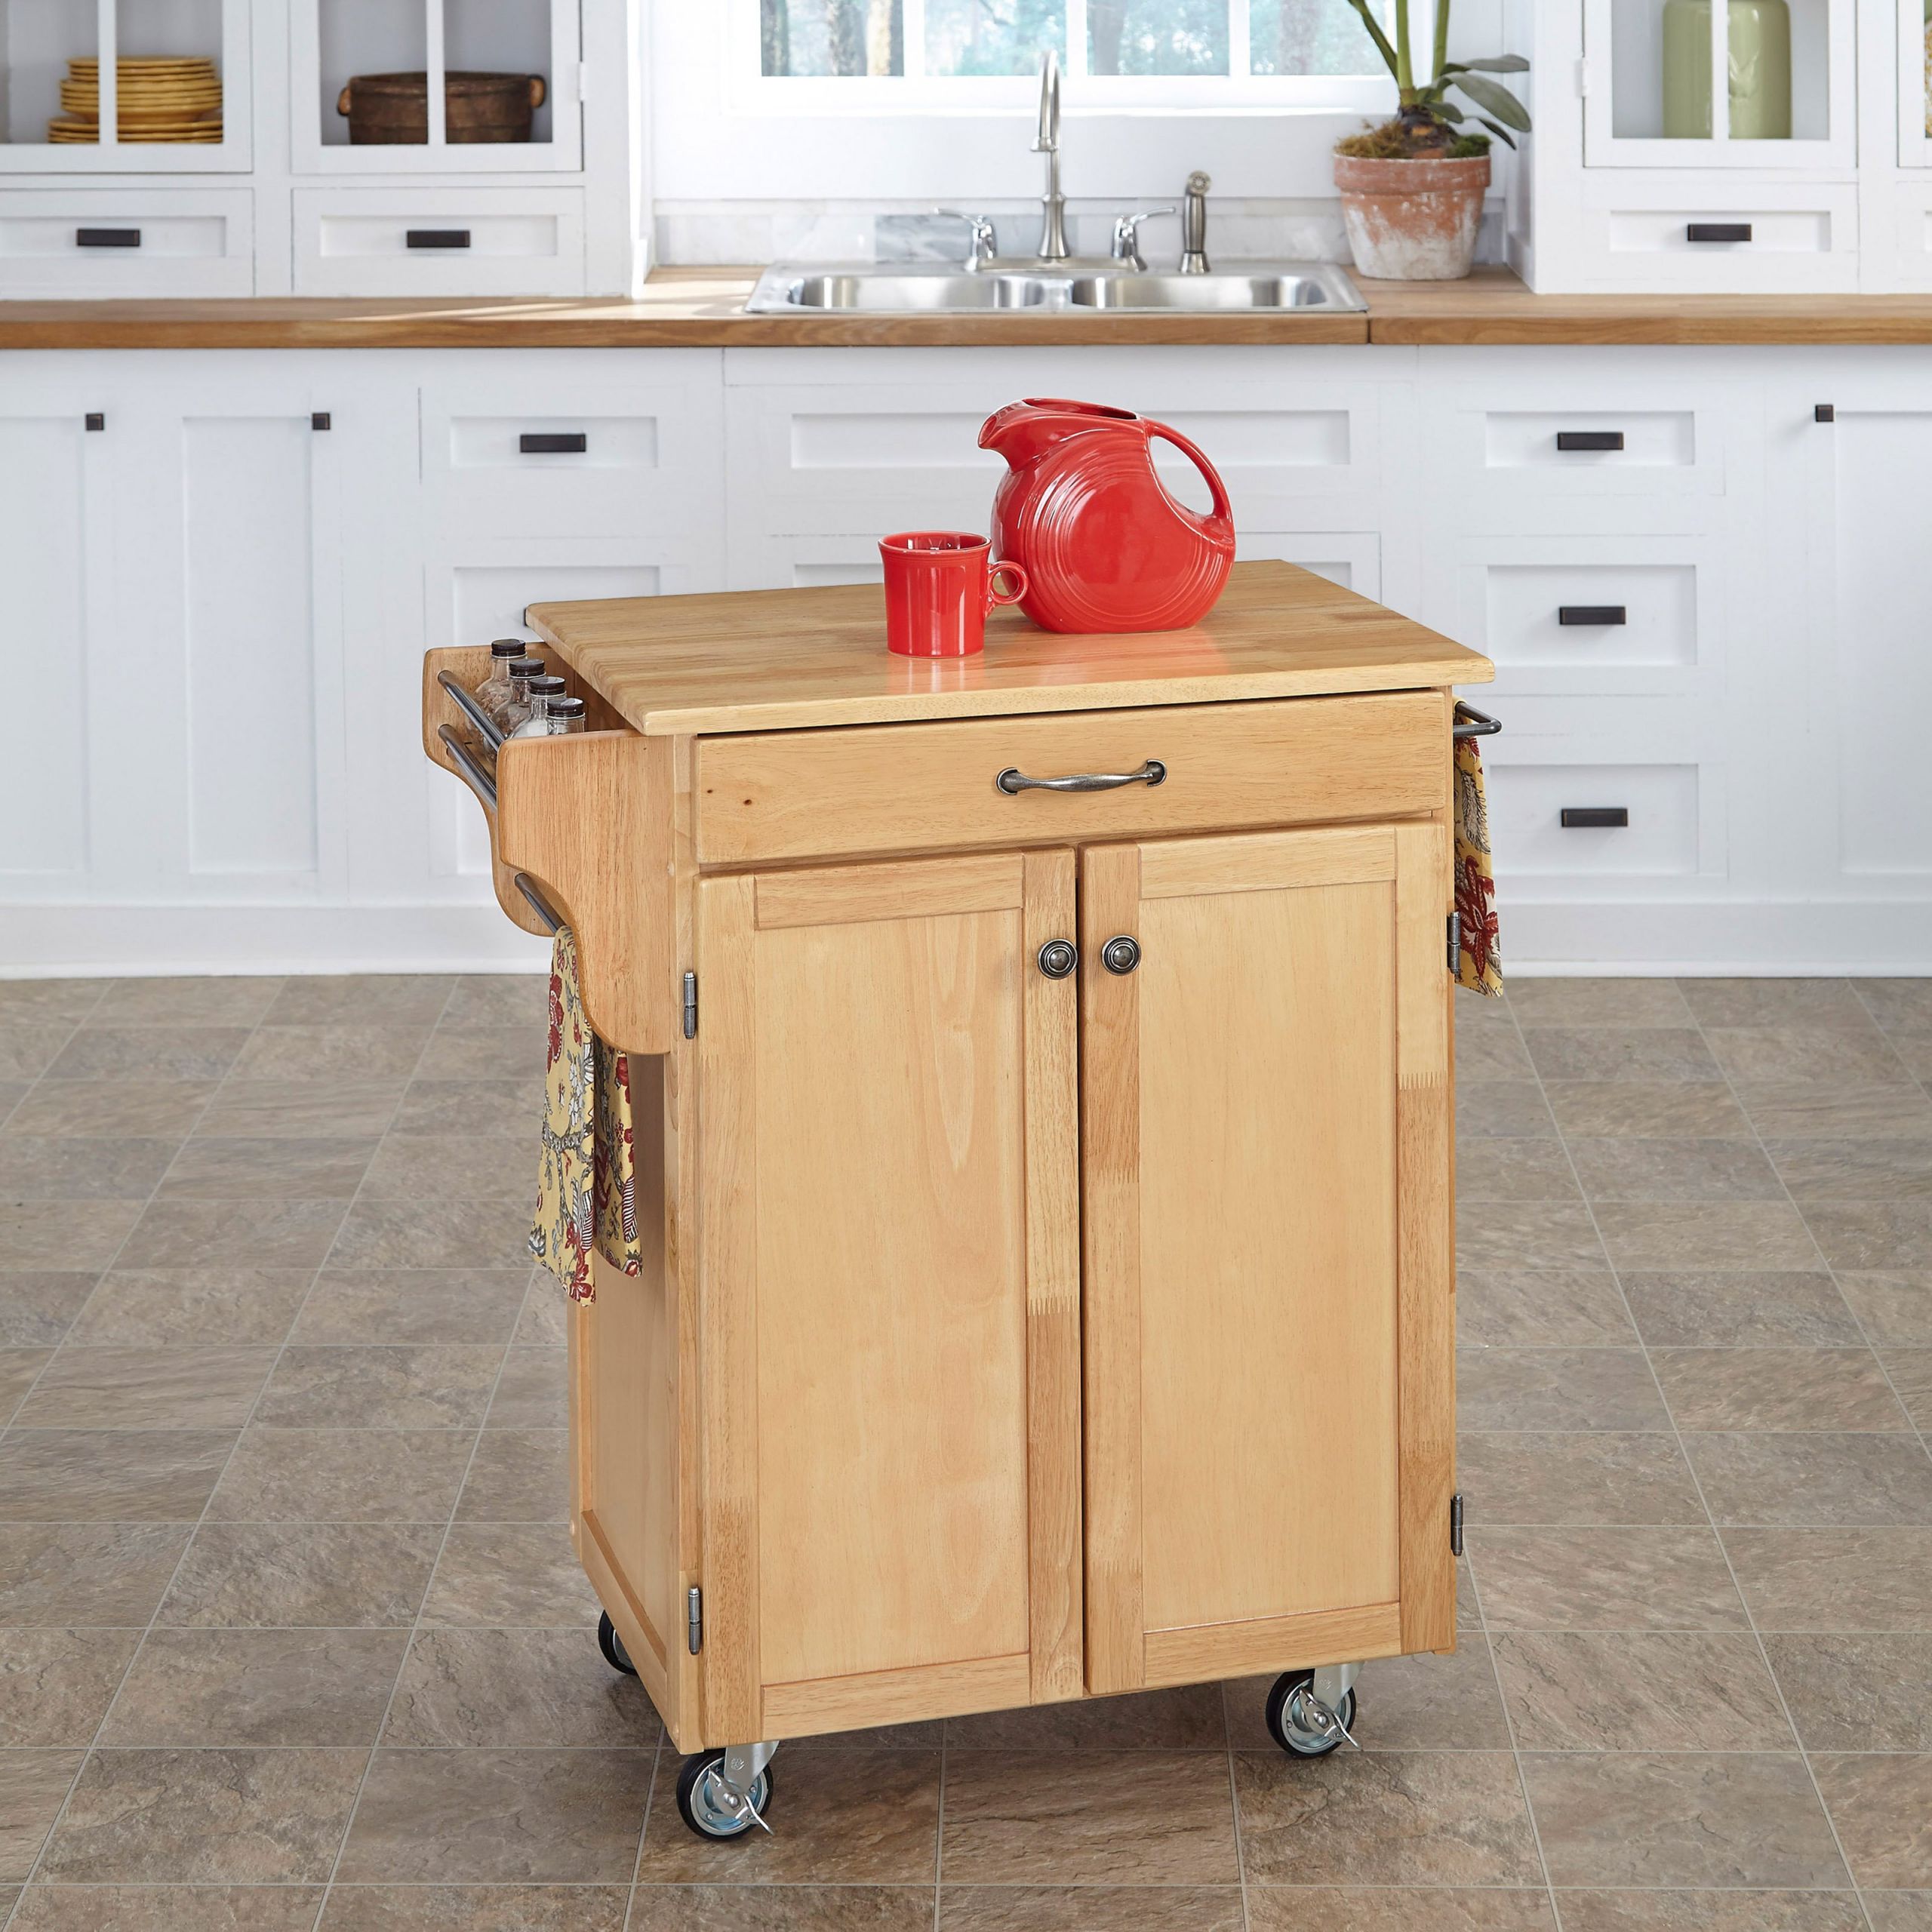 Small Kitchen Island On Wheels
 Home Styles Design Your Own Small Kitchen Cart Kitchen